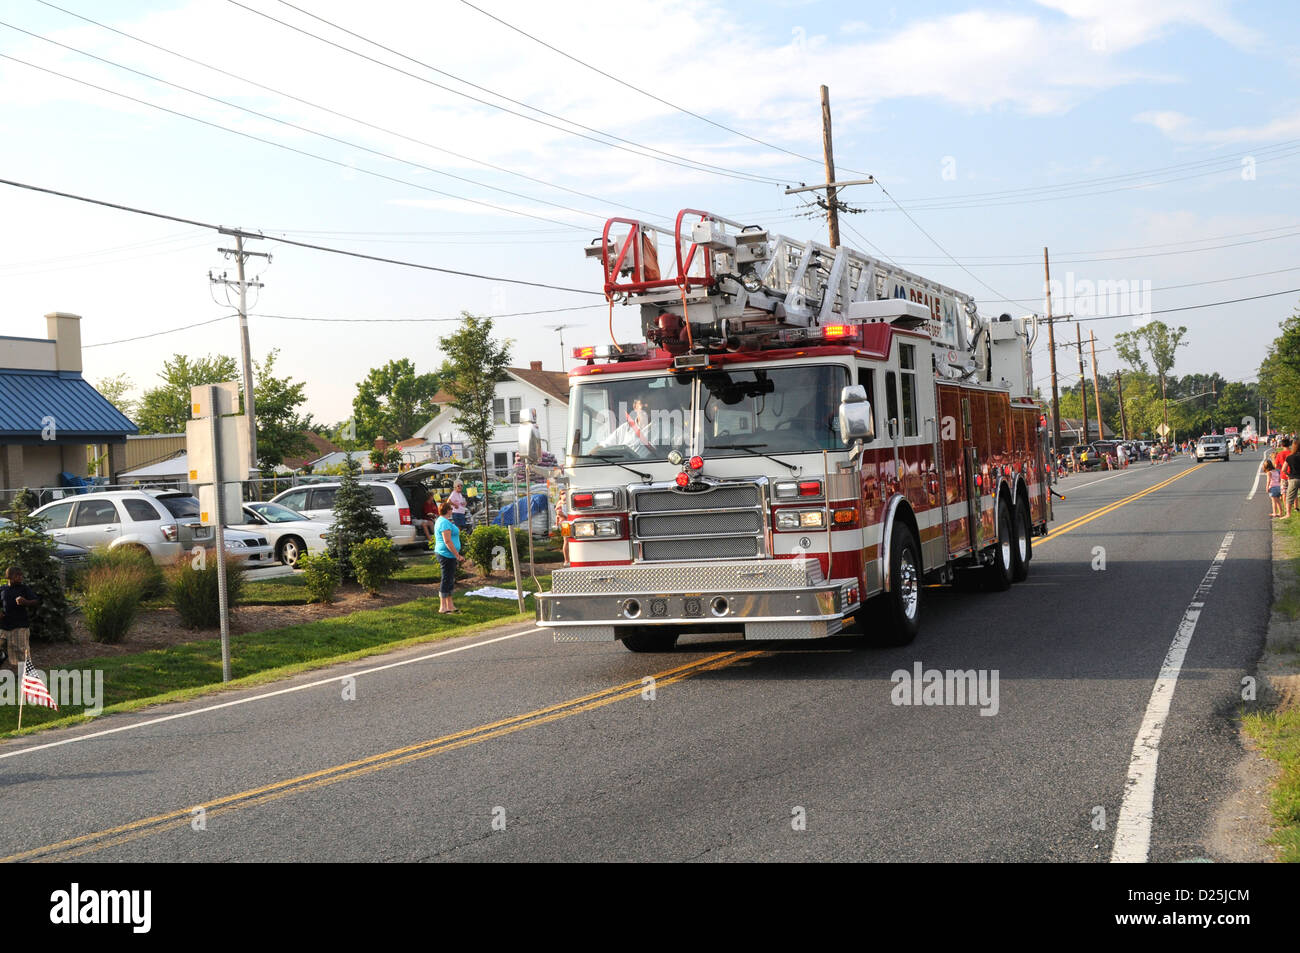 Fire truck responding on a emergency call Stock Photo